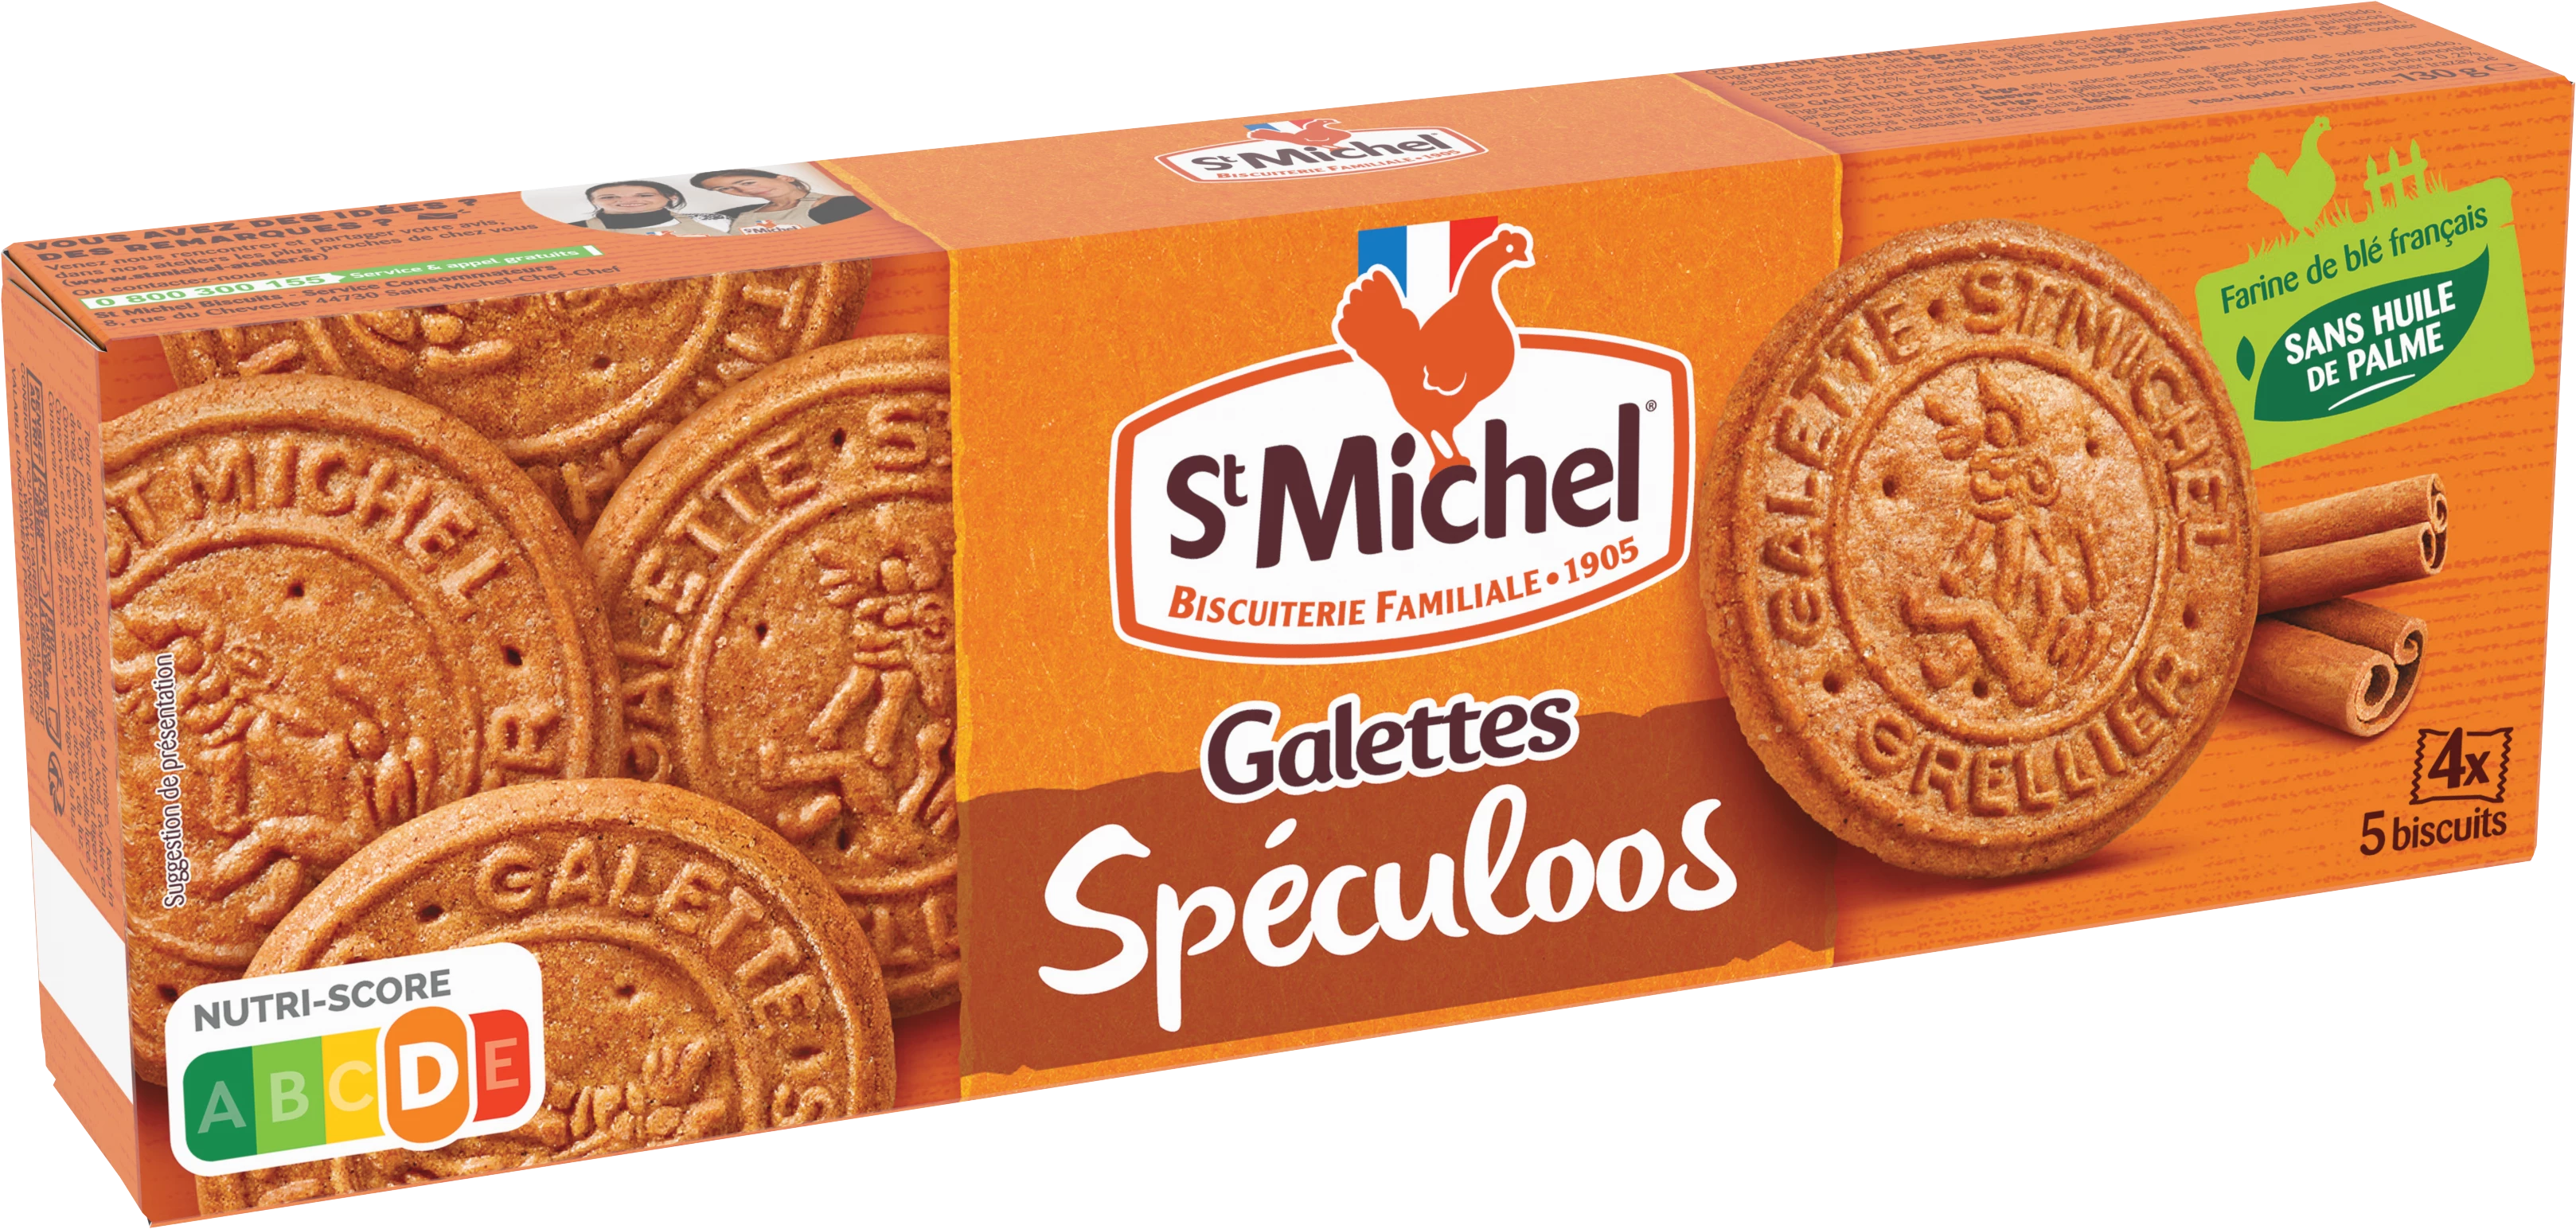 Speculoos pancakes 130g - ST MICHEL